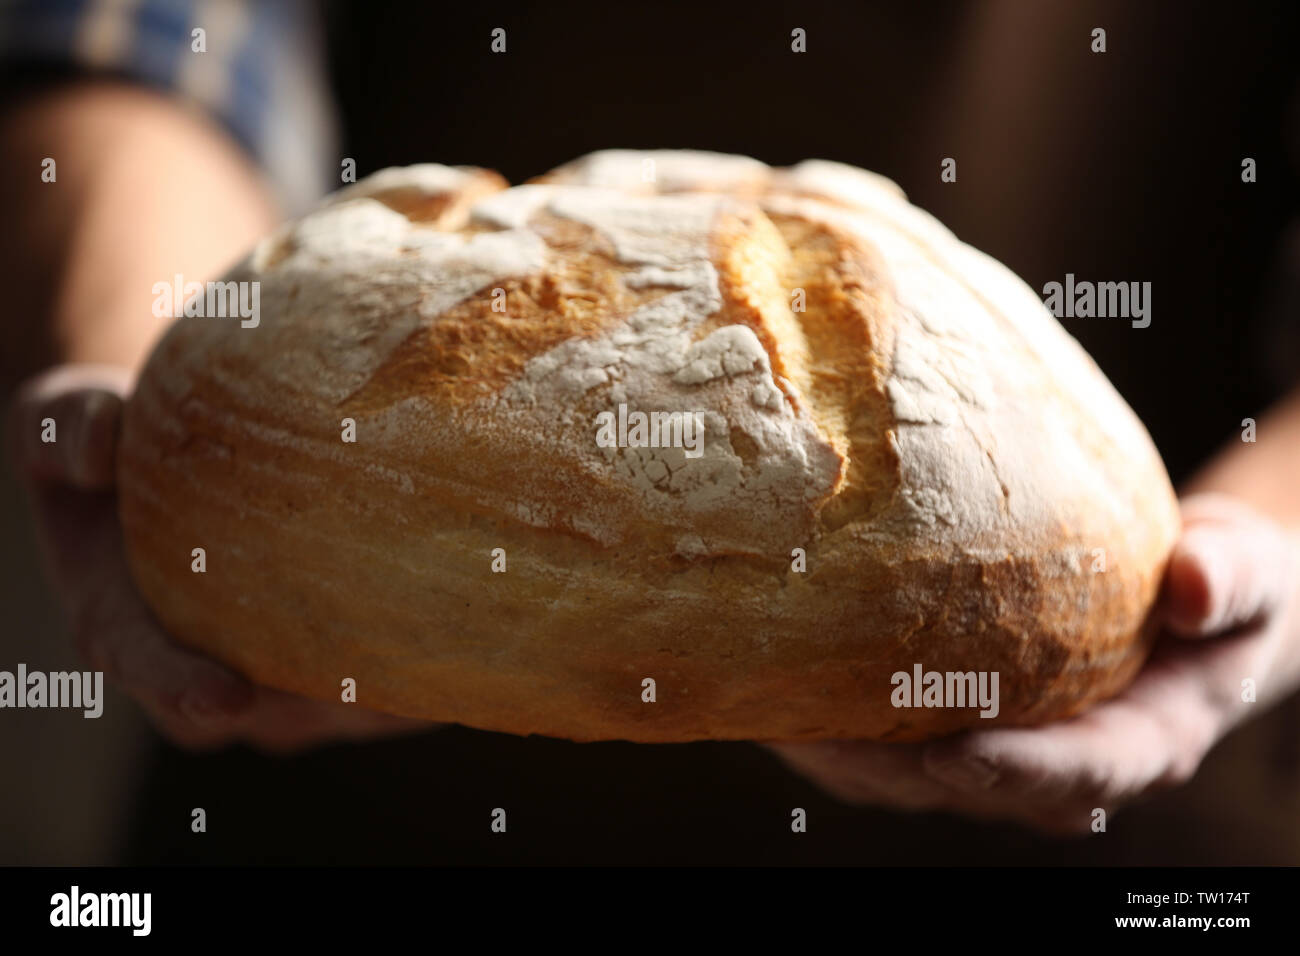 Male hands holding freshly baked wheaten bread, closeup Stock Photo